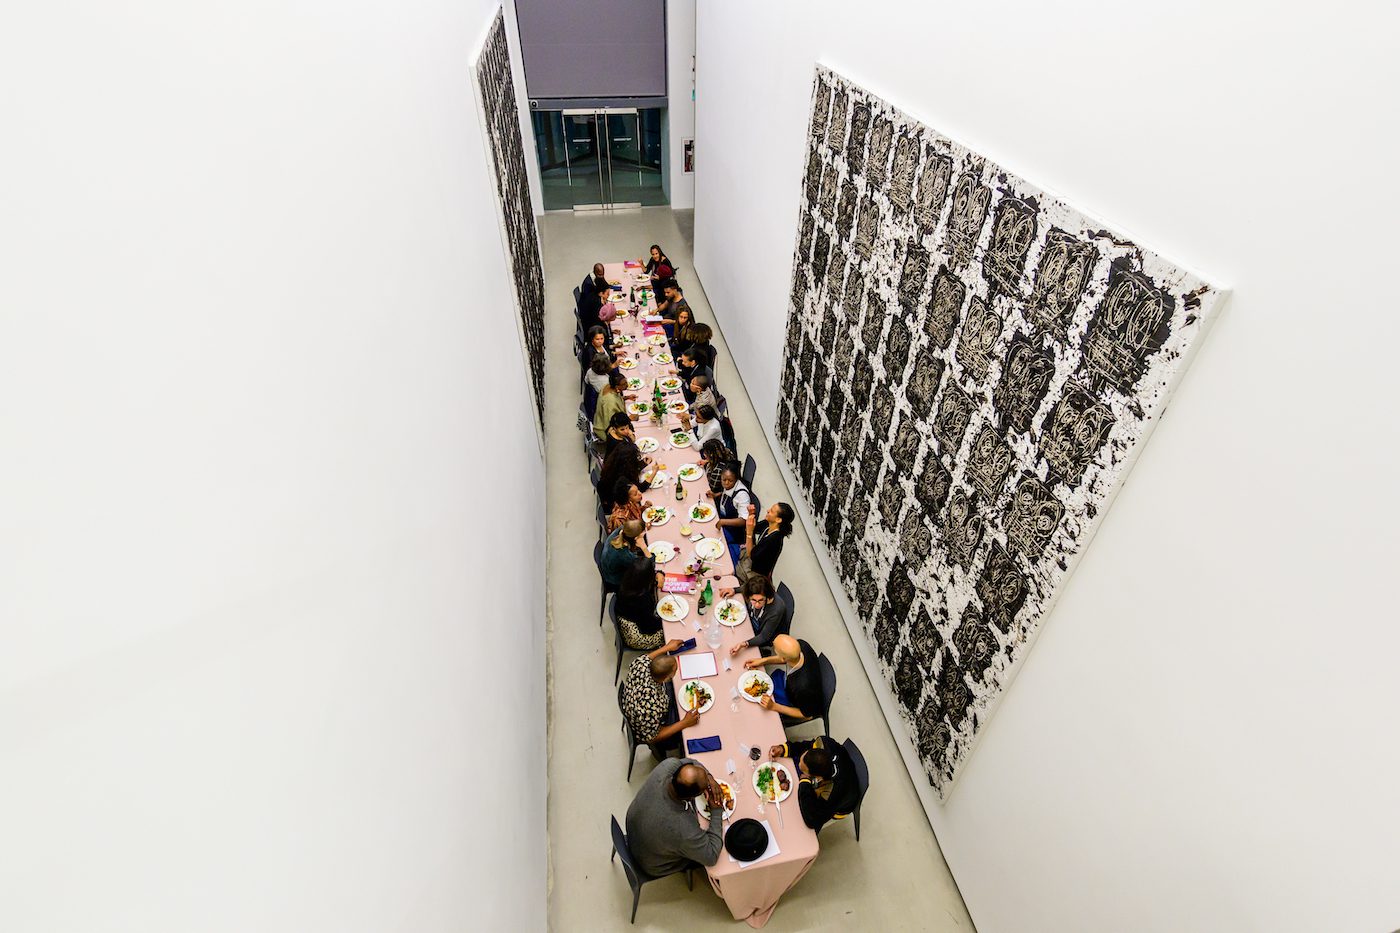 Photographer: Henry Chan - Location: Dinner between Rashid Johnson's Anxious Audiences at the Power Plant Gallery - 2019